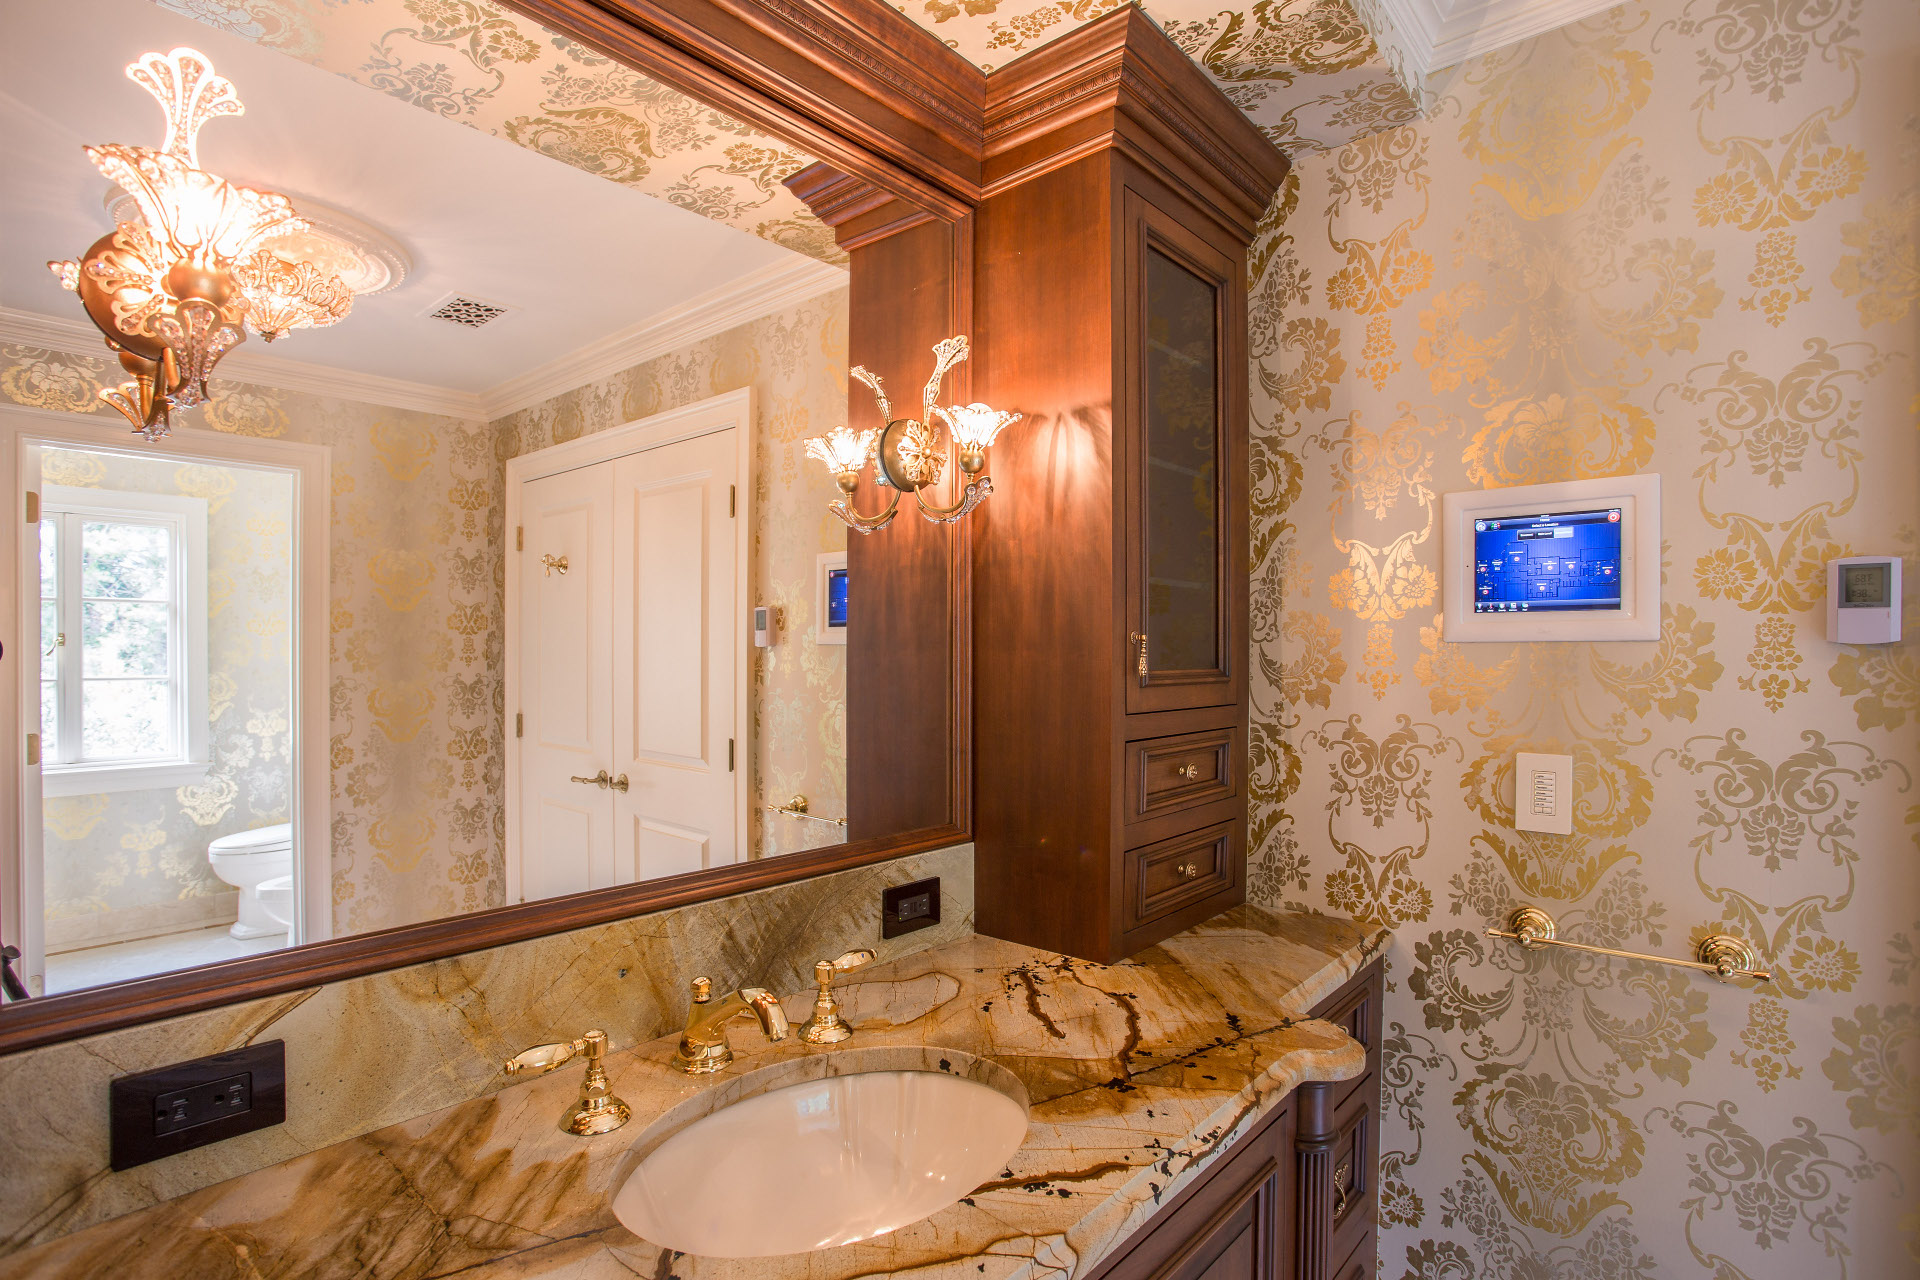 Bathroom and Touchpanel